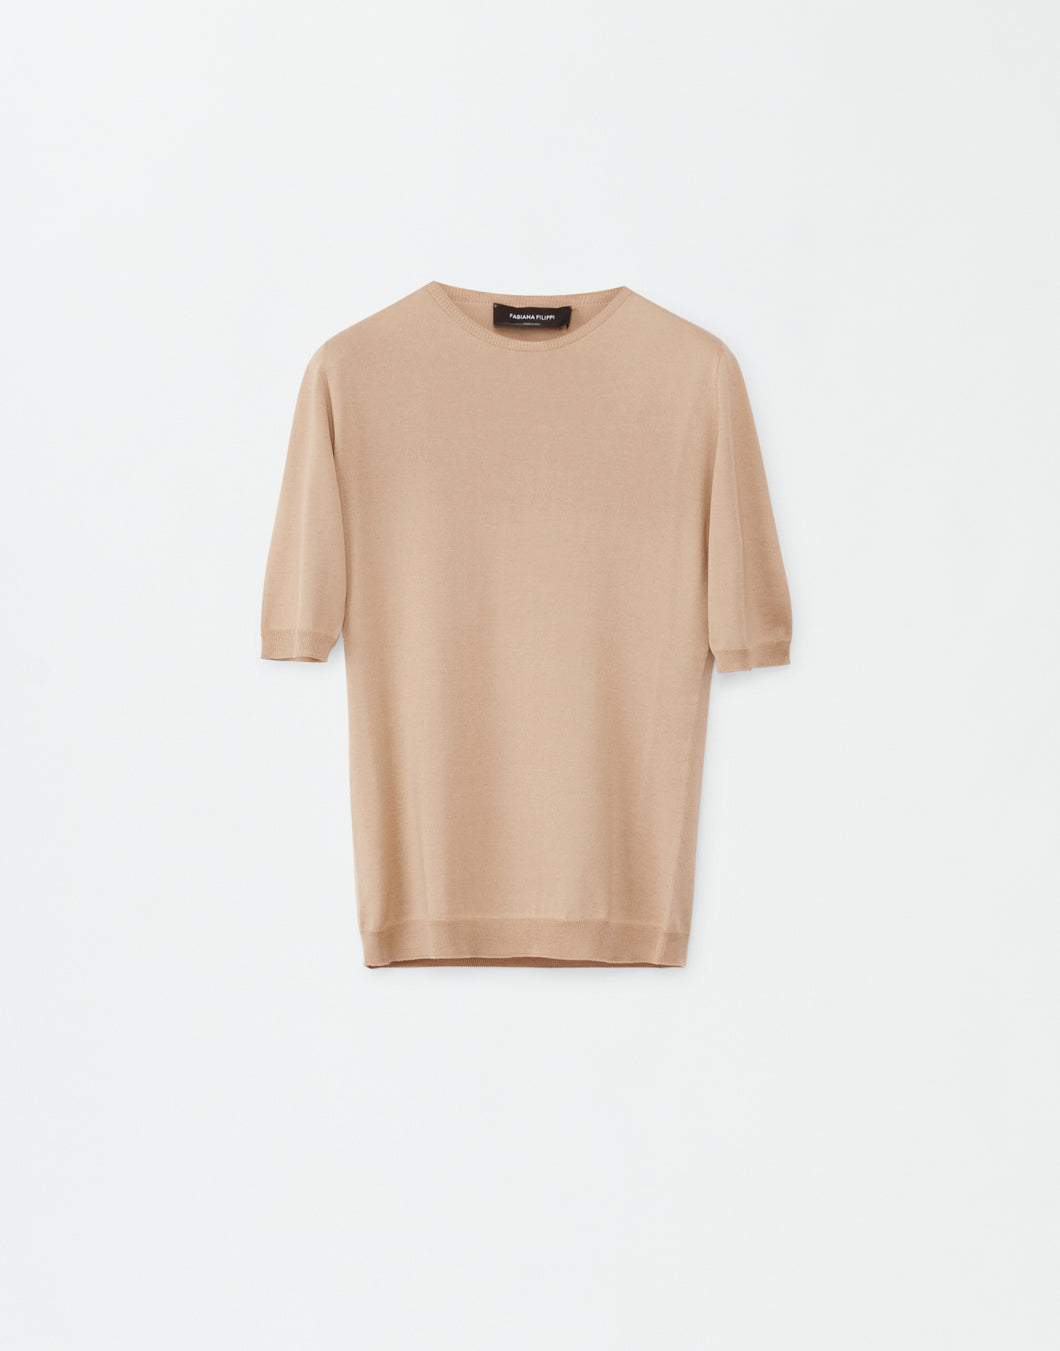 Cotton and silk sweater, sand